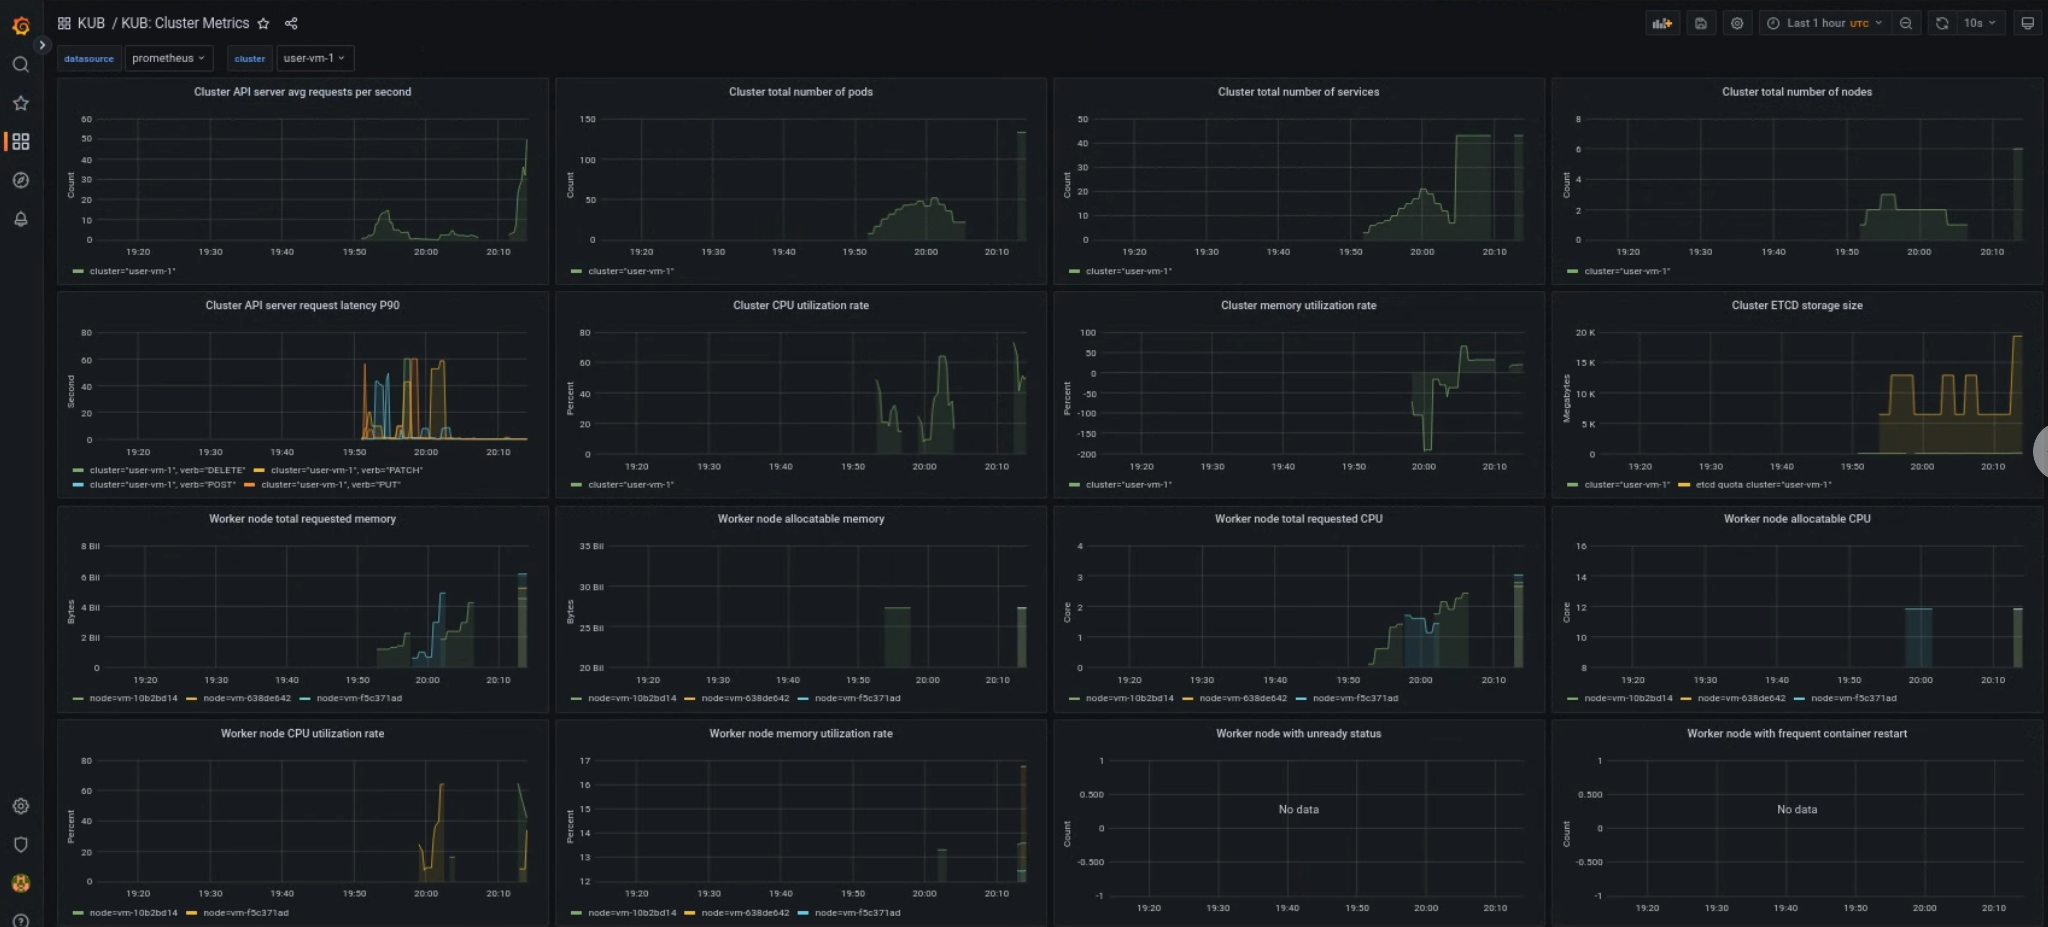 View the metrics dashboard for Kubernetes clusters.